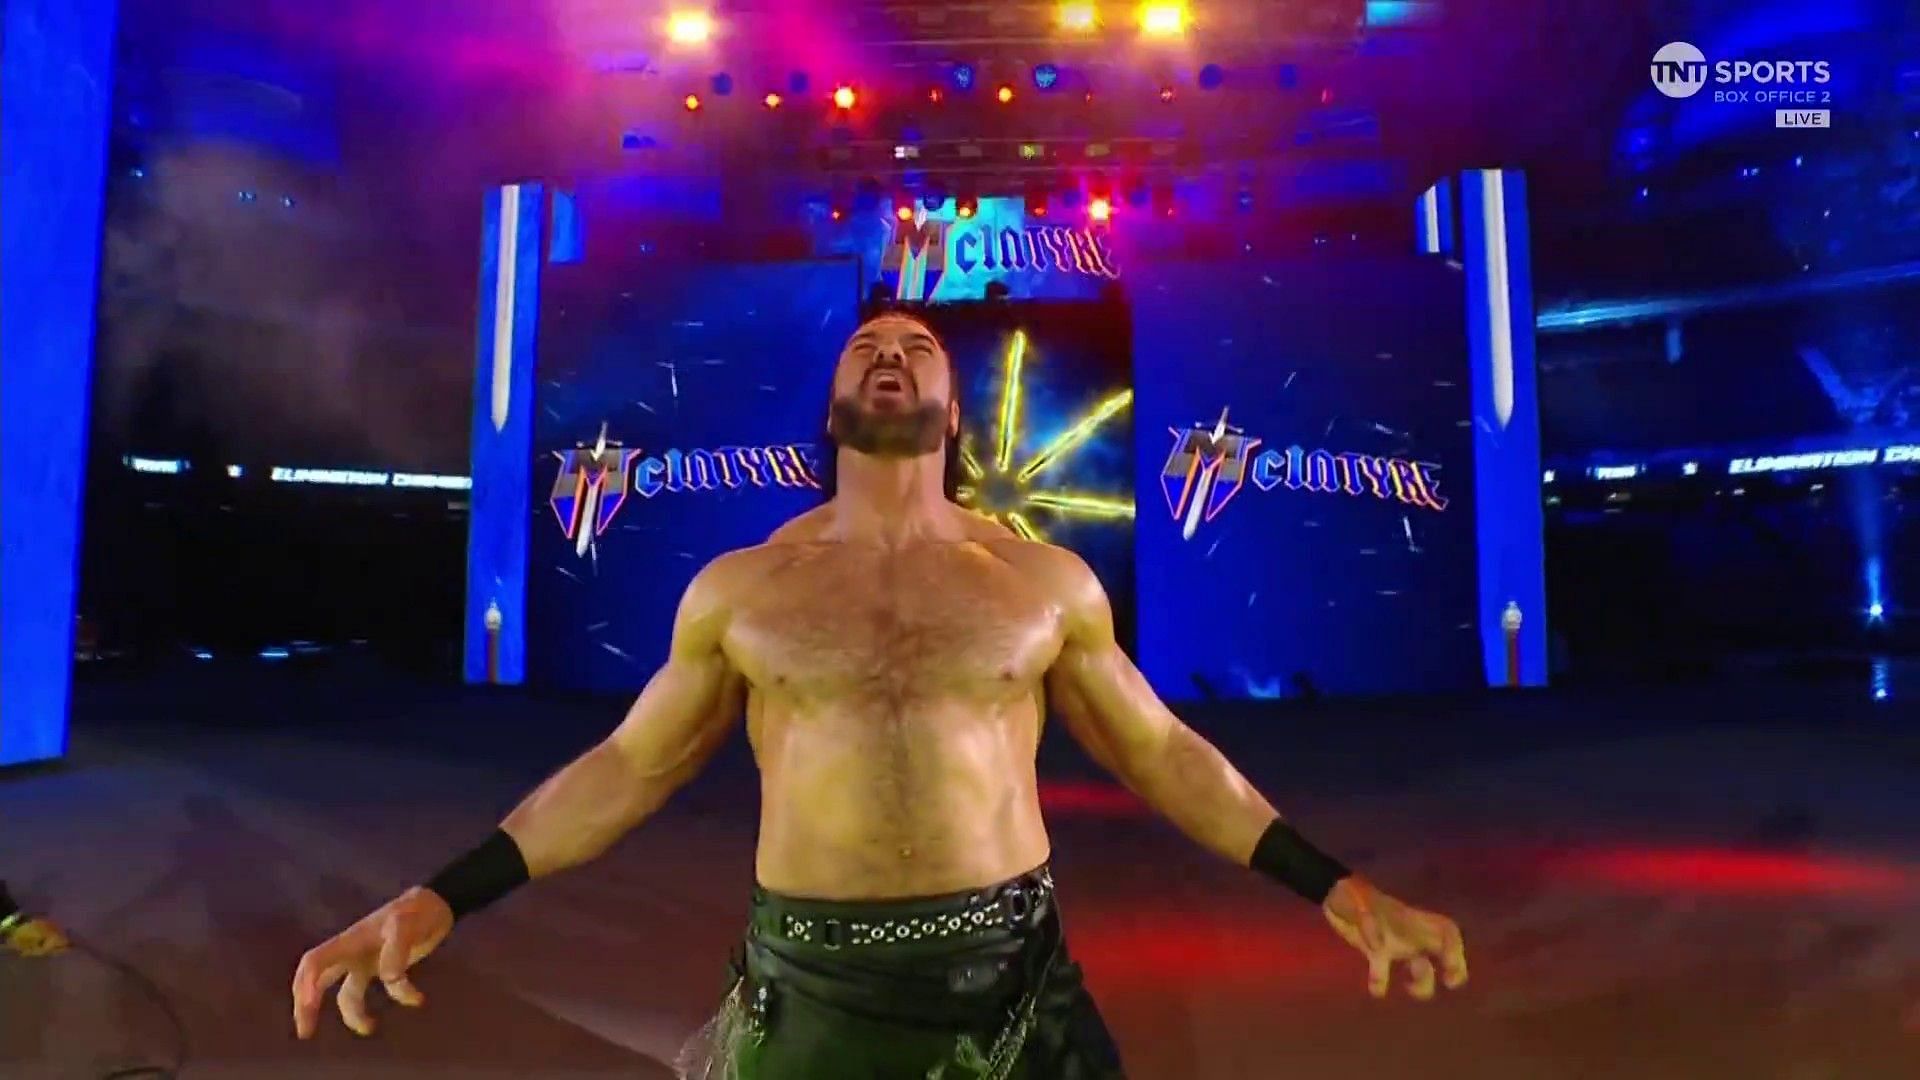 Drew McIntyre at the Elimination Chamber